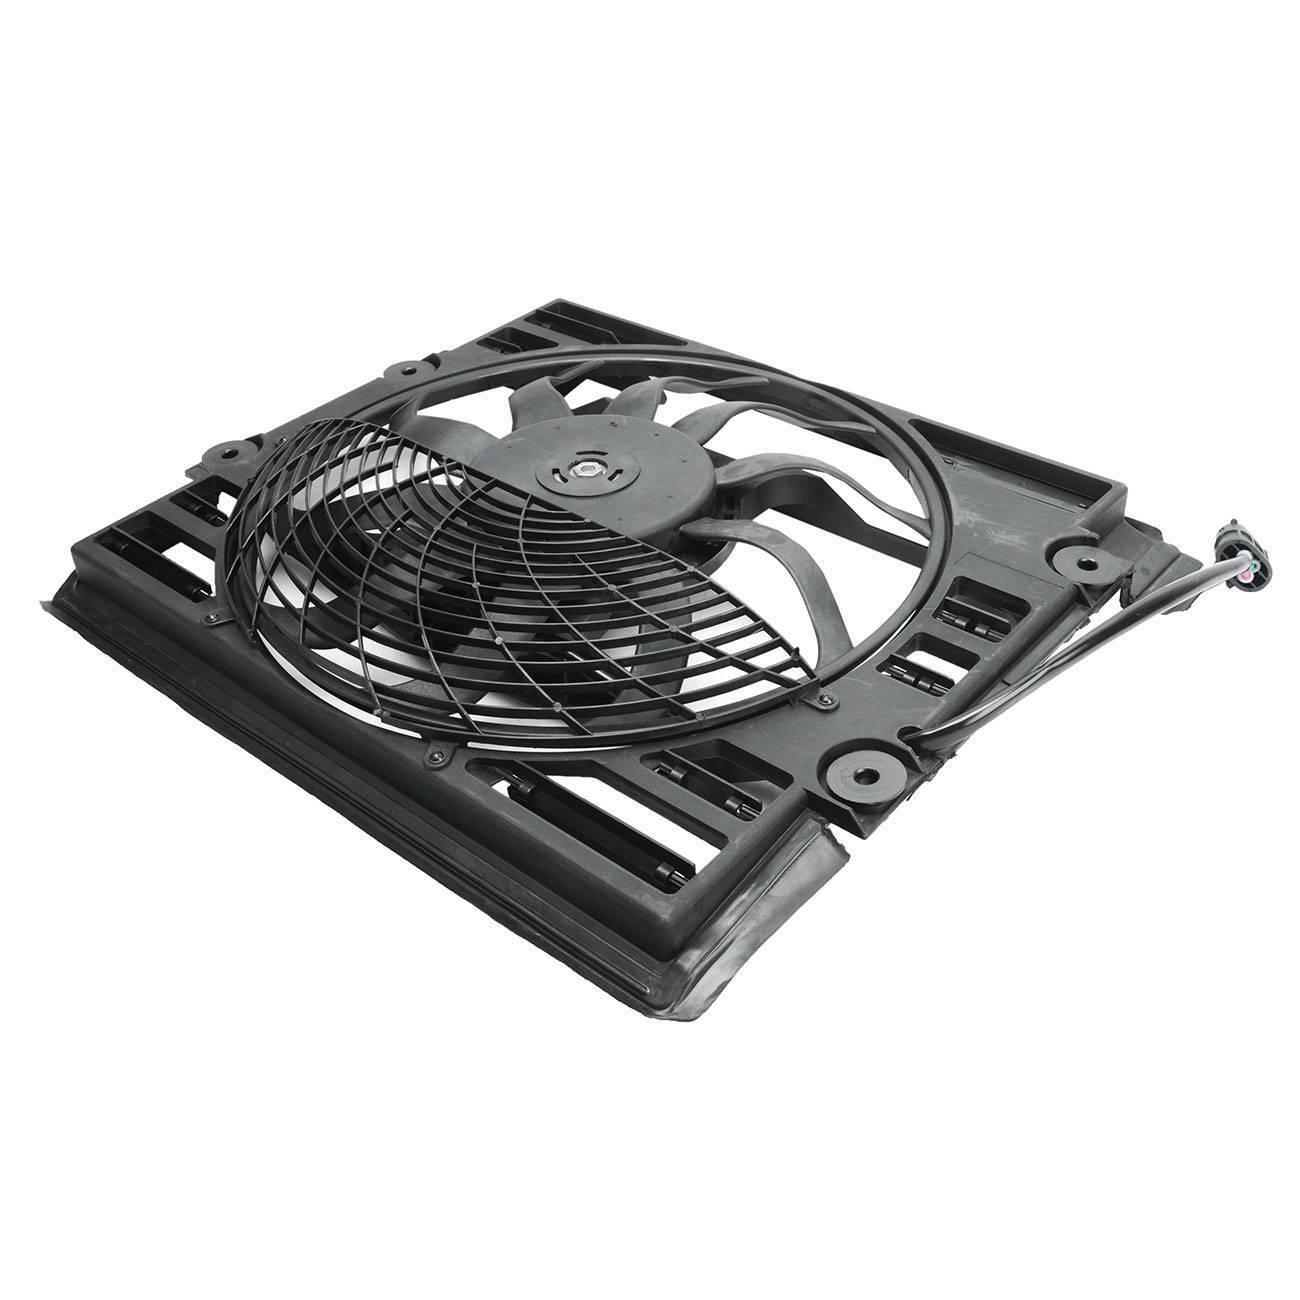 Air Conditioning Radiator Fan 250W for BMW E38 740i 750i 64506908024 German Made